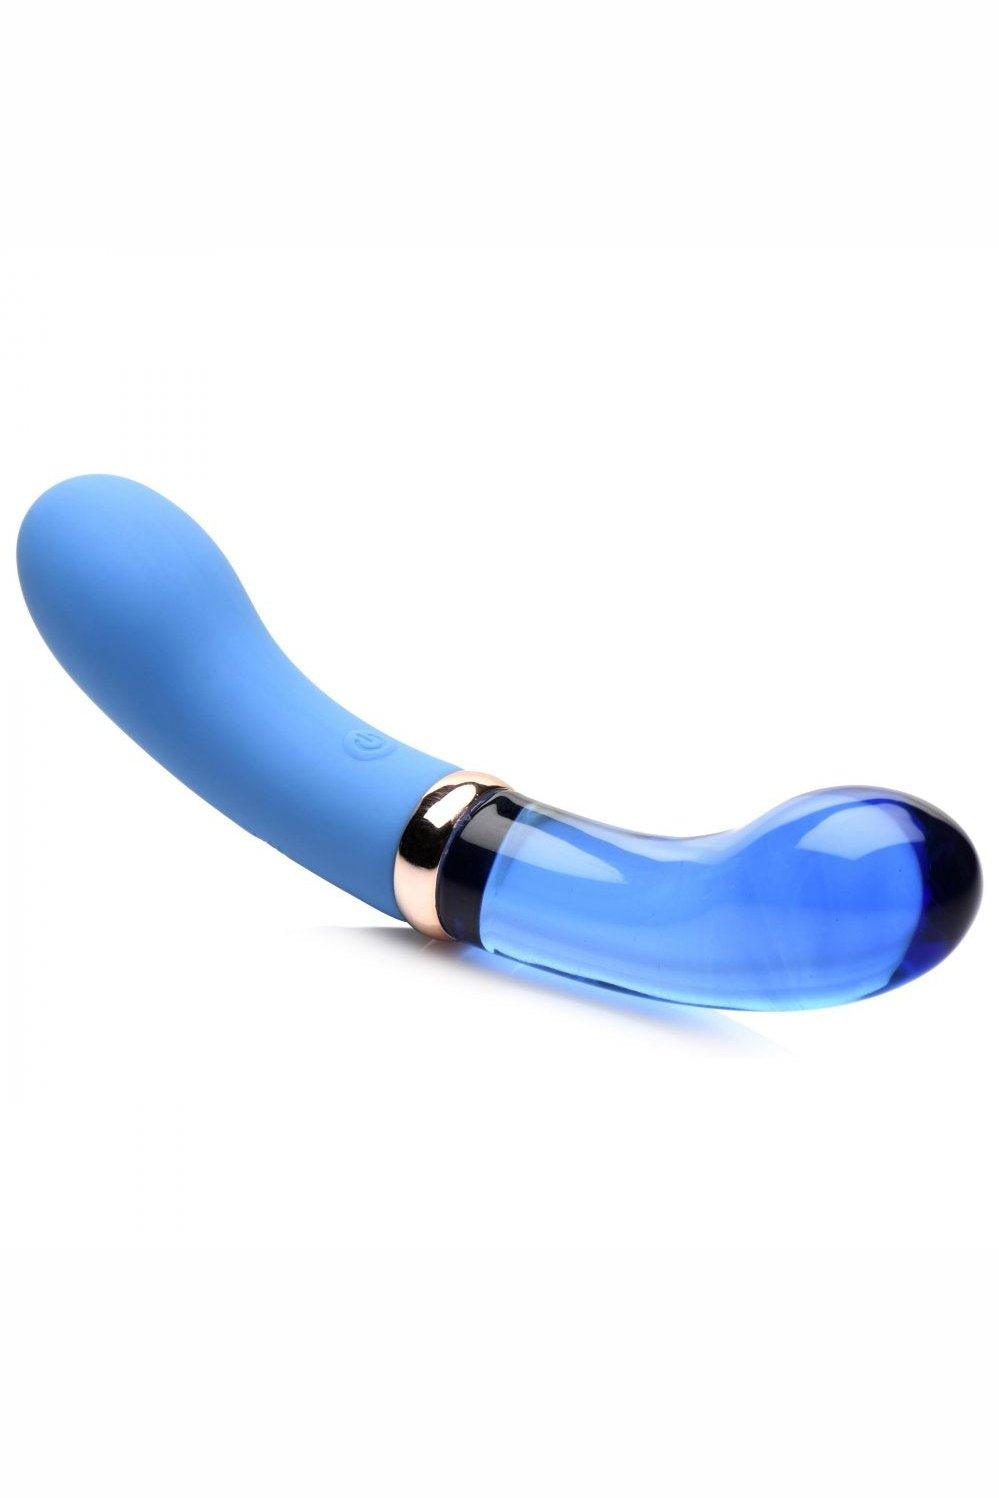 10X Bleu Dual Ended G-Spot Silicone and Glass Vibrator - Sex On the Go